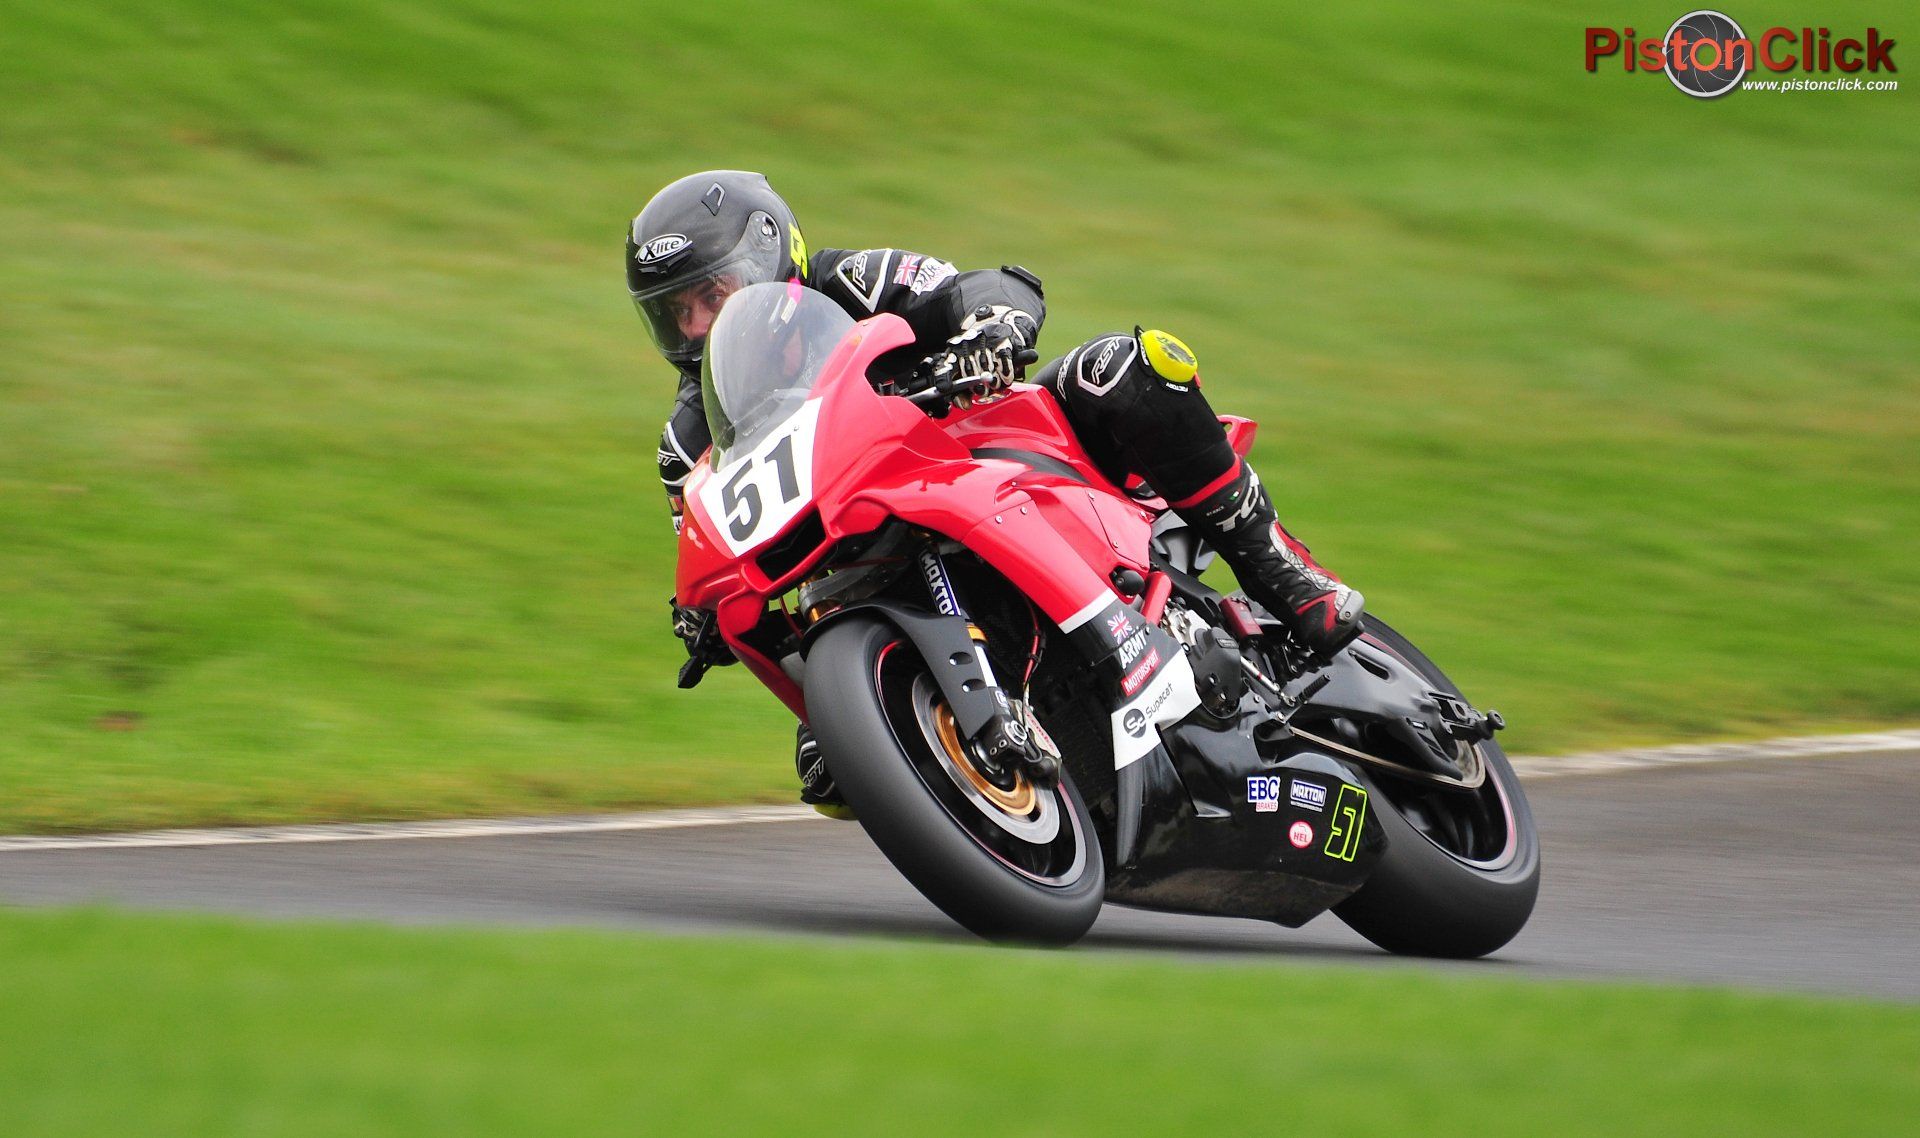 GB Racing Inter-Services Motorcycle Racing